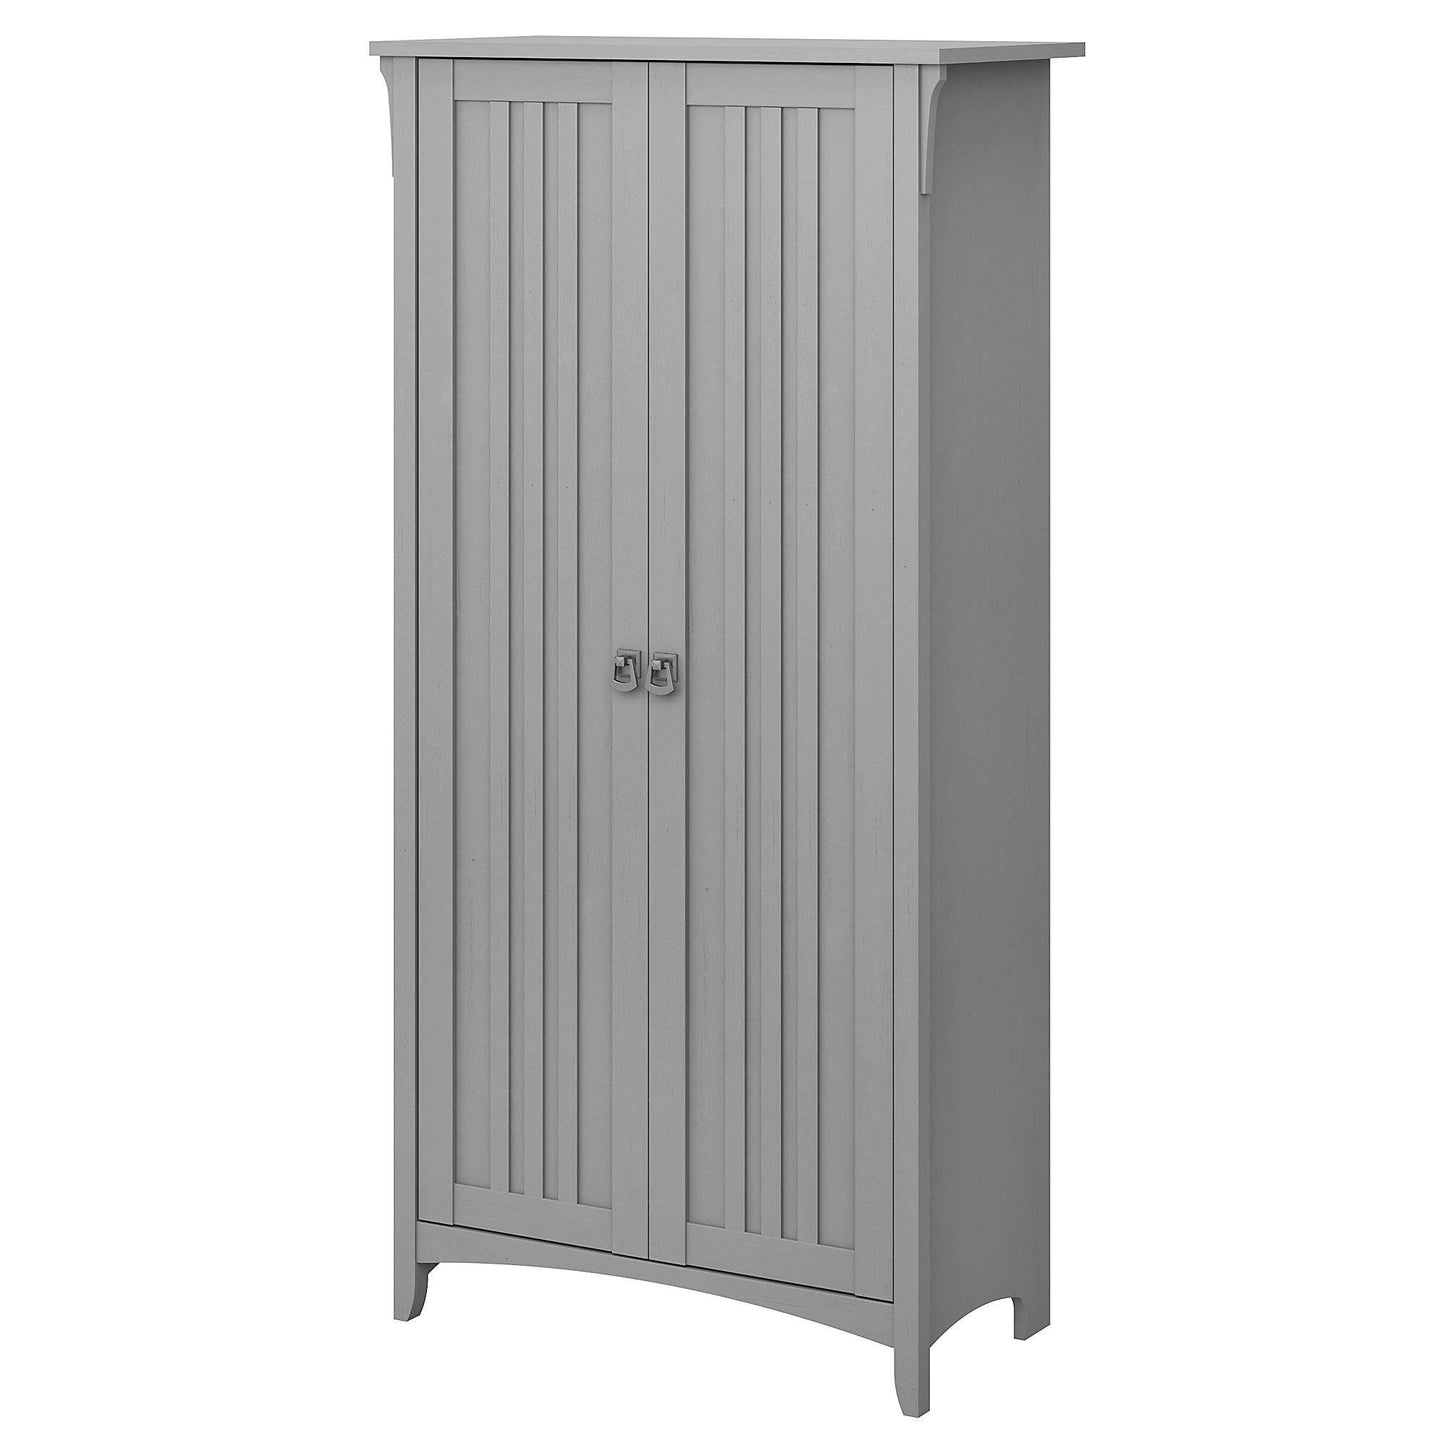 Furniture Salinas Kitchen Pantry Cabinet With Doors, Cape Cod Gray